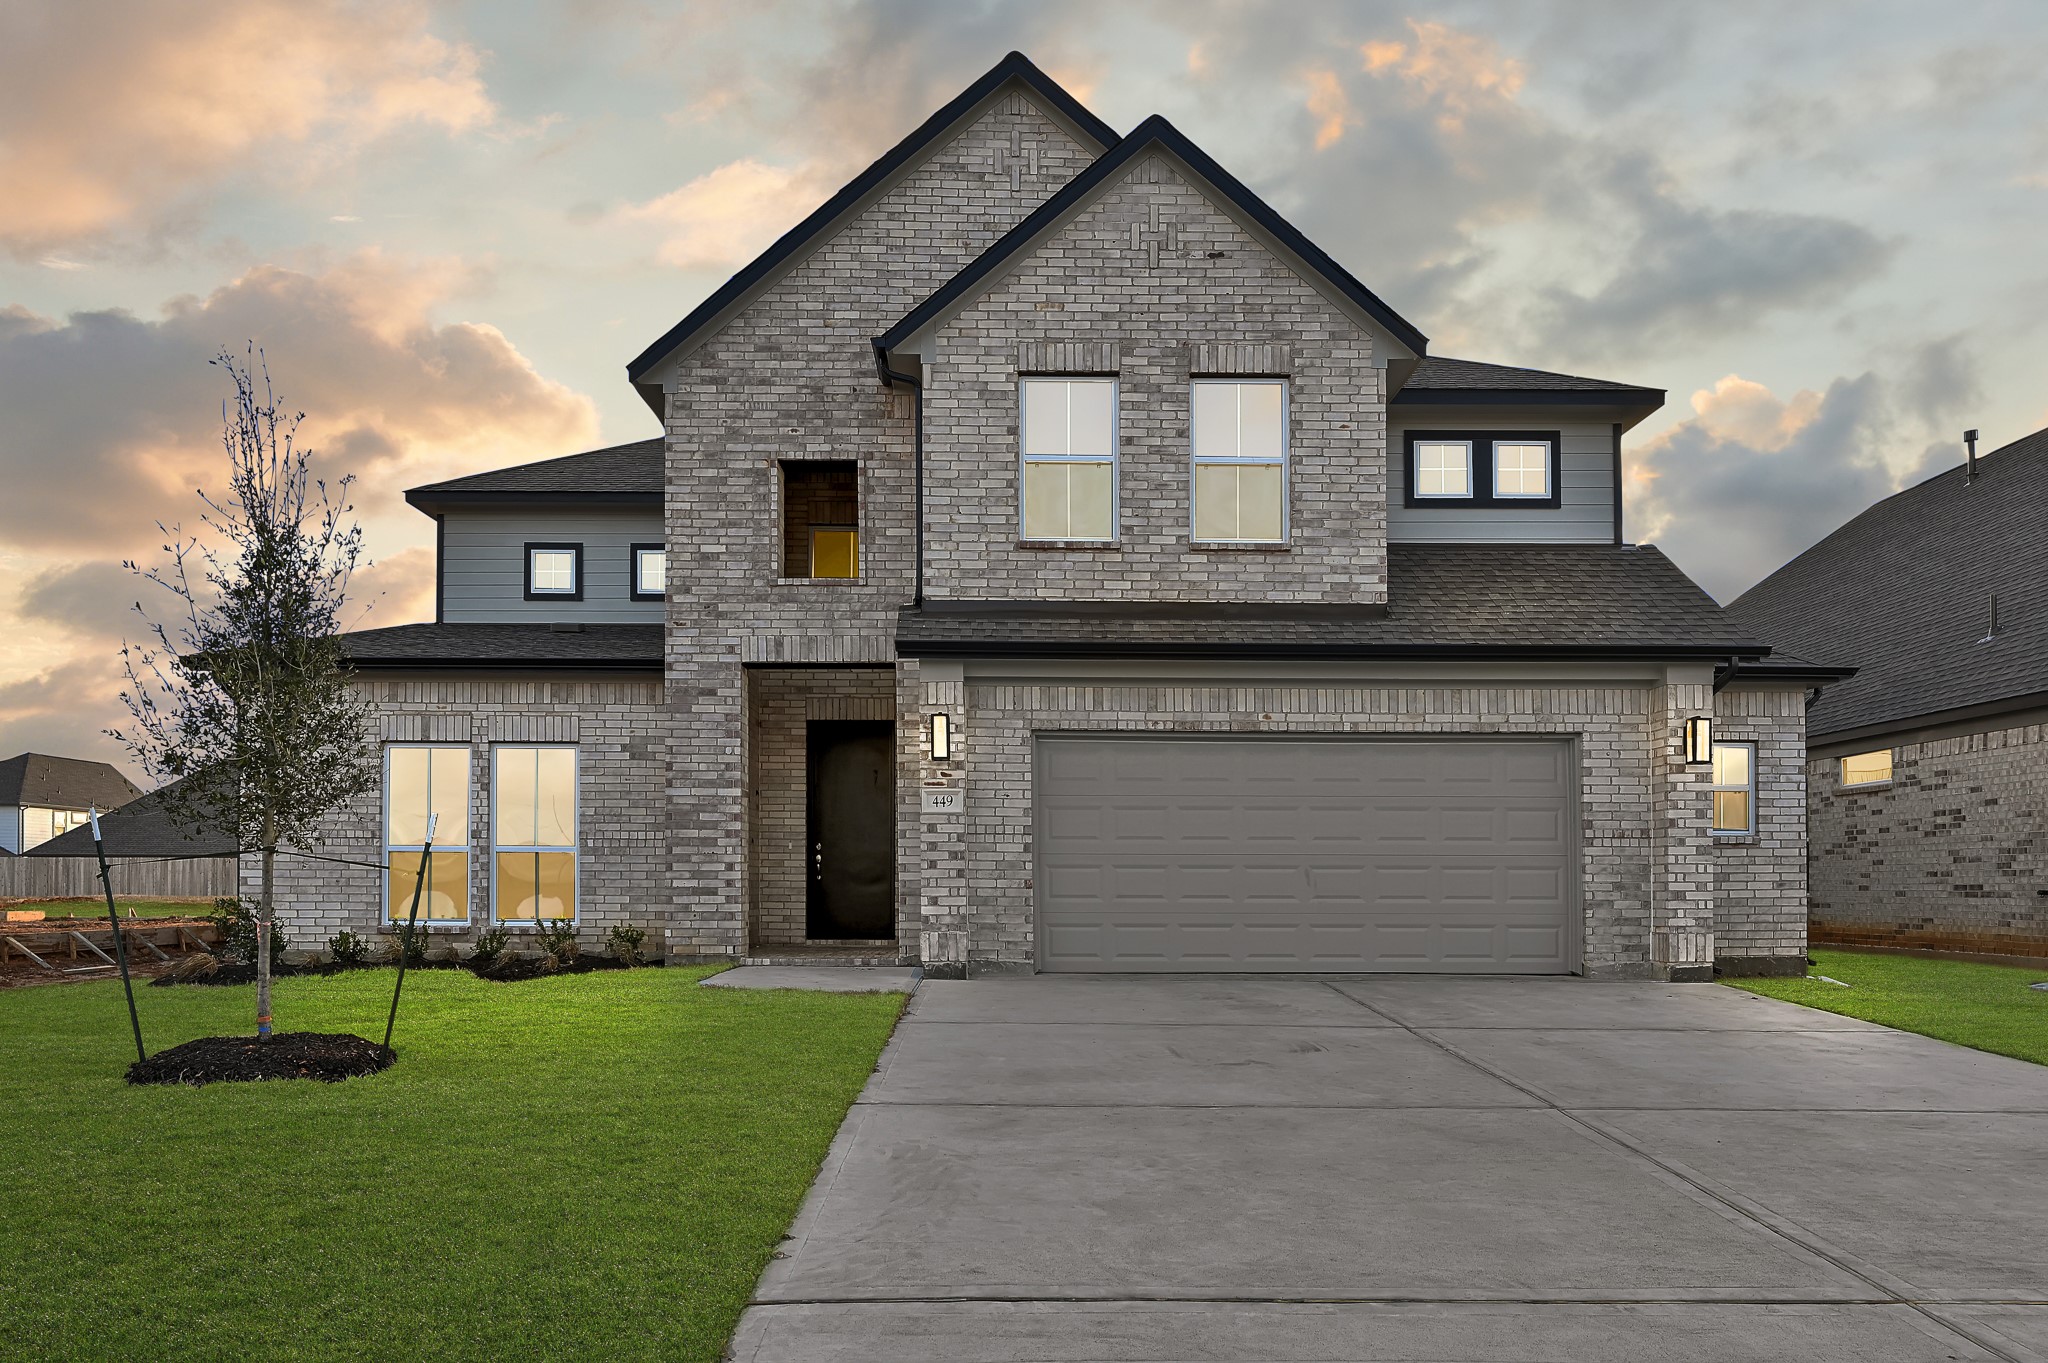 Welcome home to 449 Piney Rock Lane located in Beacon Hill and zoned to Waller ISD.